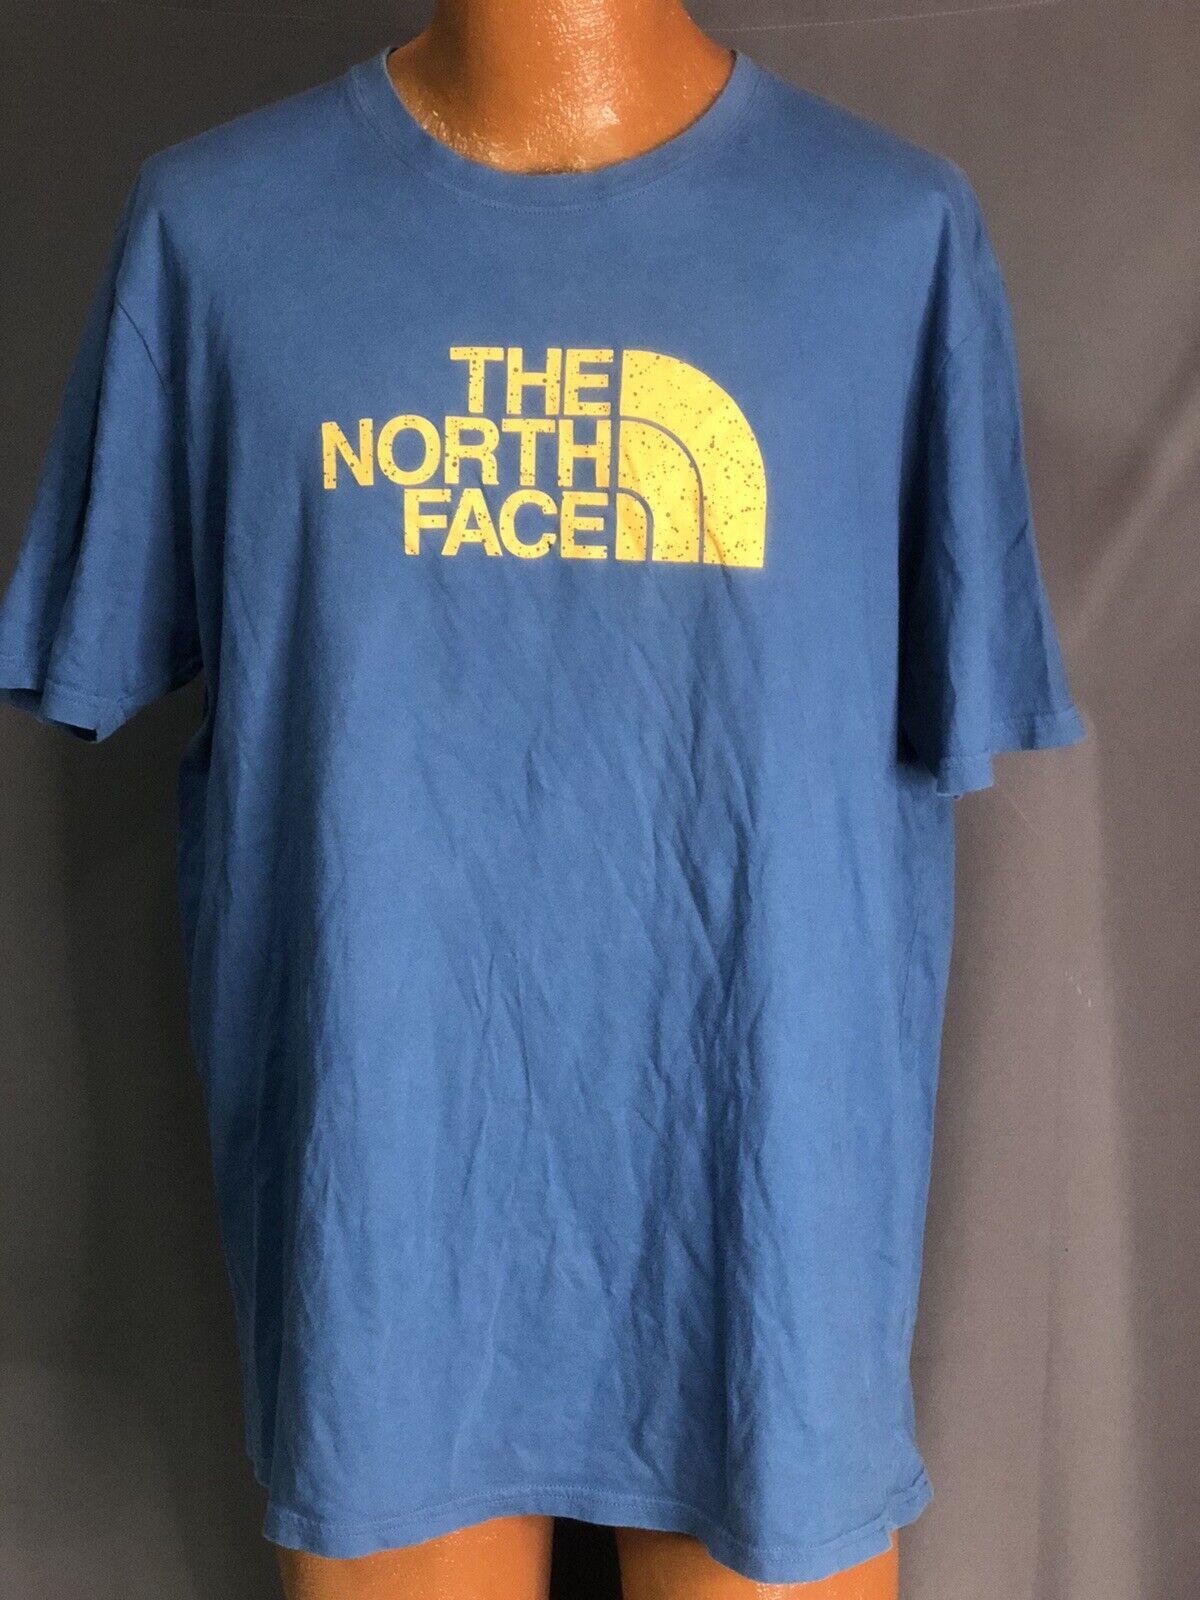 Primary image for The North Face Freckled Logo Camiseta Hombre XL Azul